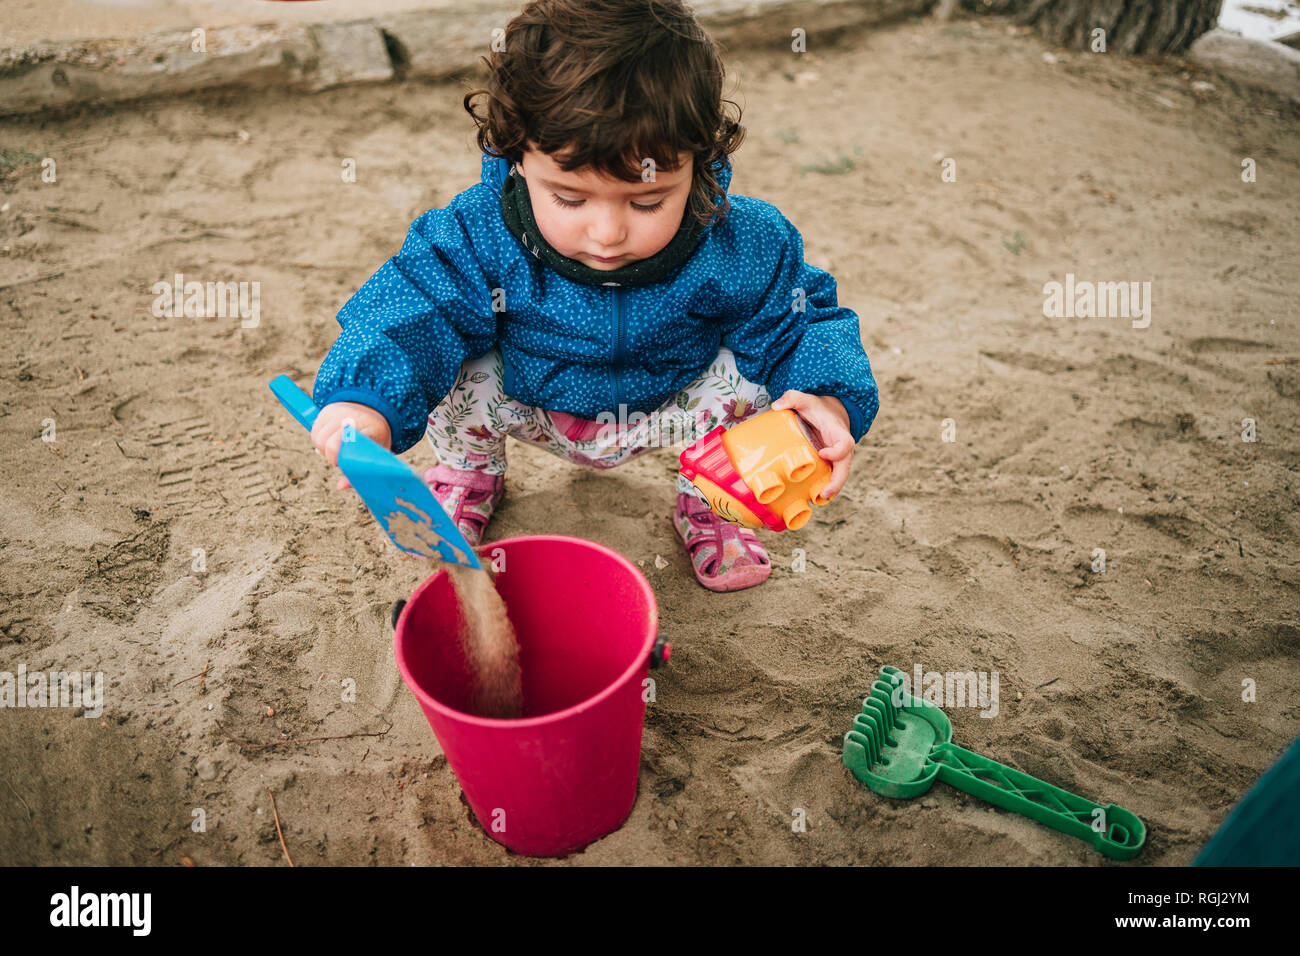 Baby girl playing with sand, shovel and bucket Stock Photo